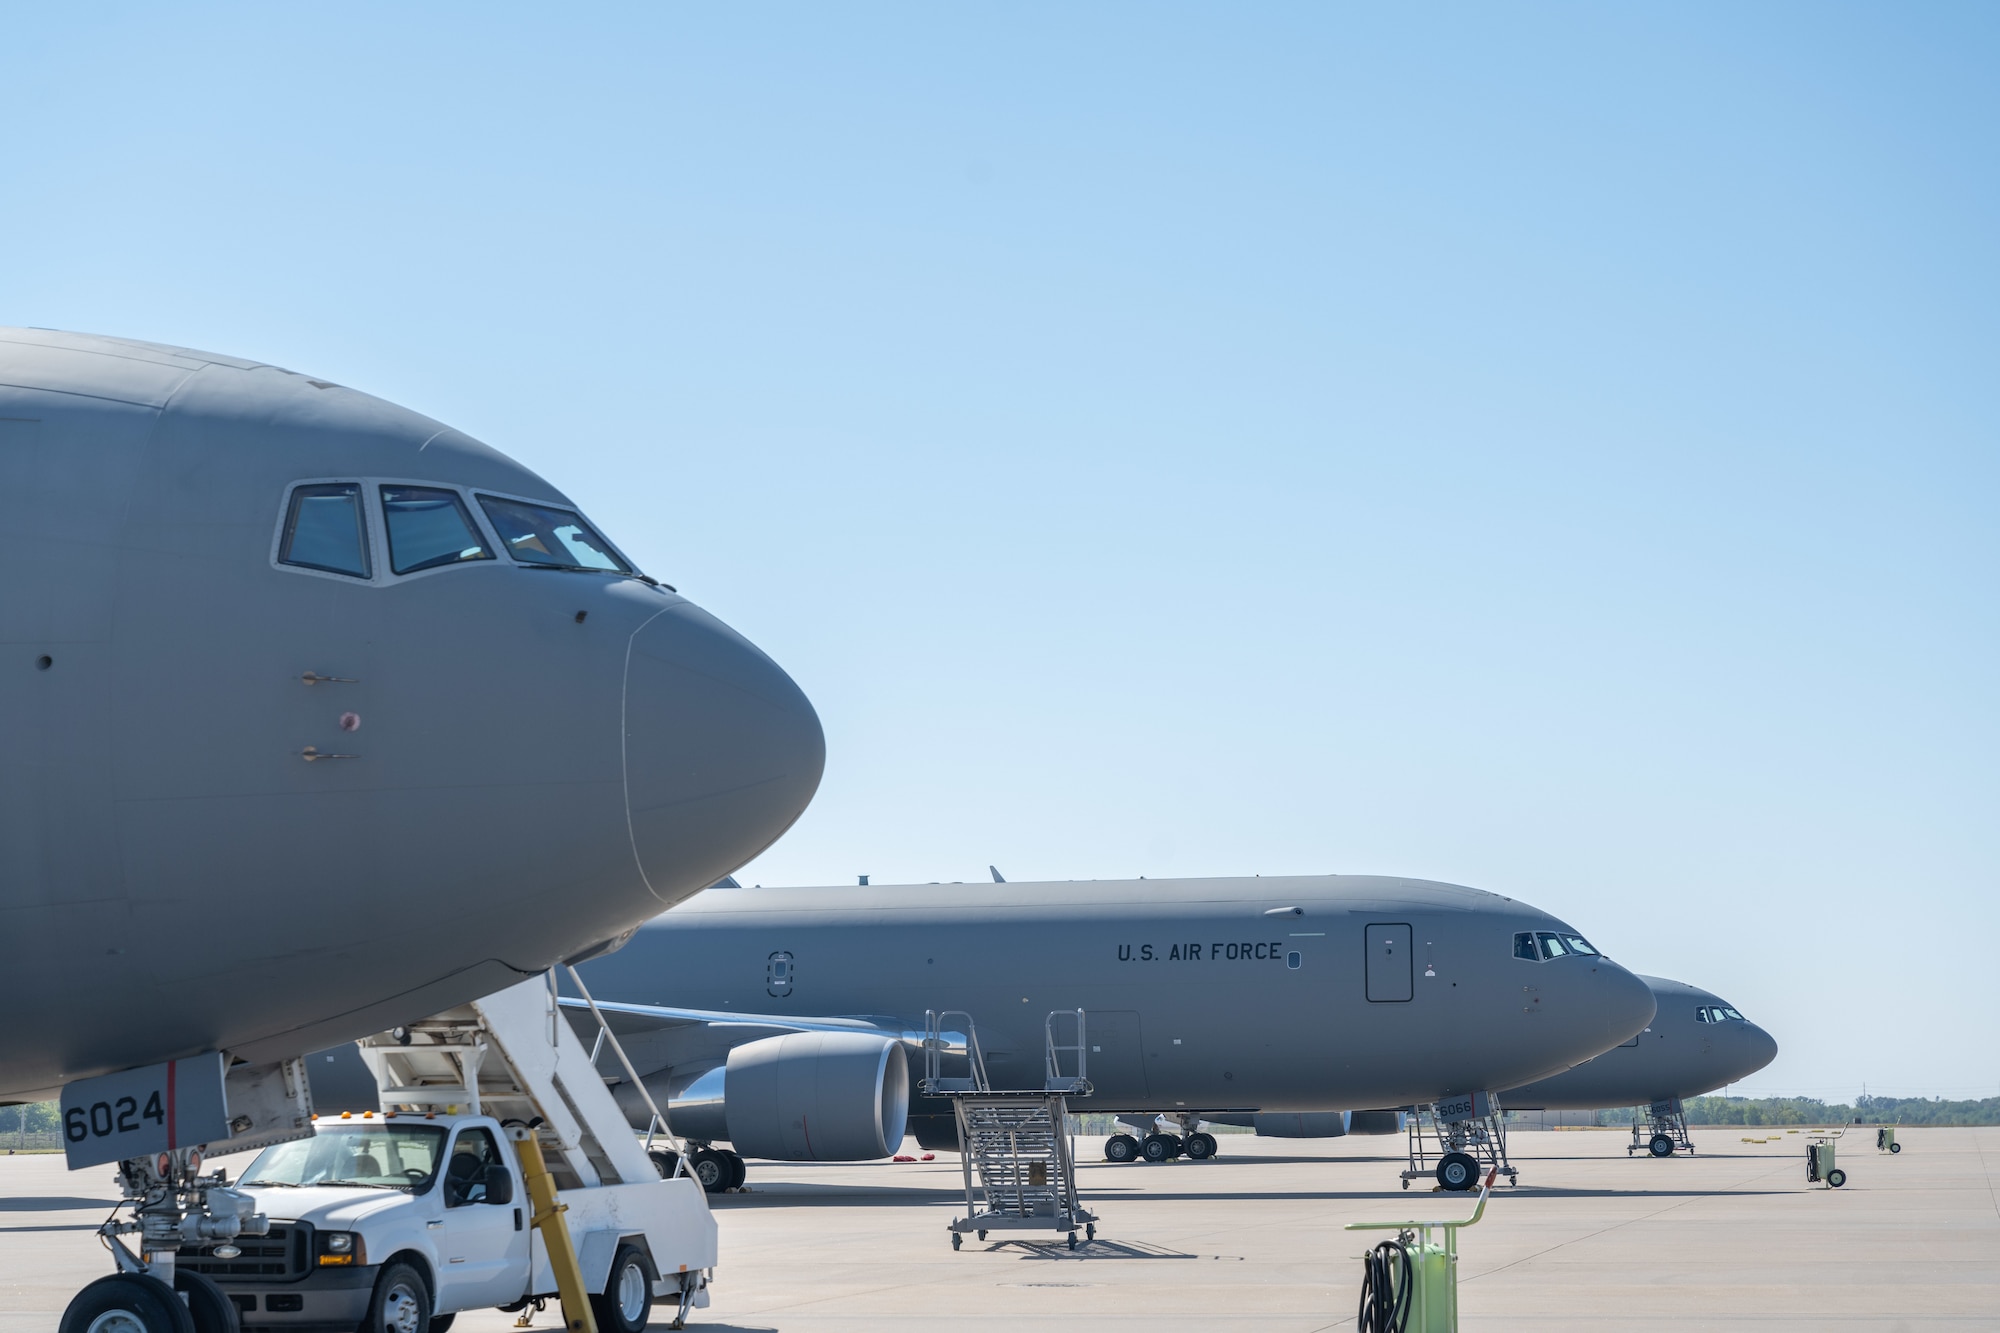 Three KC-46As assigned to the 916th Air Refueling Wing sit on the ramp after landing on Sep. 29, 2022, at McConnell Air Force Base, Kansas. Before hurricane Ian could strike, nine airframes were sent out of an abundance of caution from Seymour Johnson Air Force Base, North Carolina. (U.S. Air Force photo by Staff Sgt. Nathan Eckert)